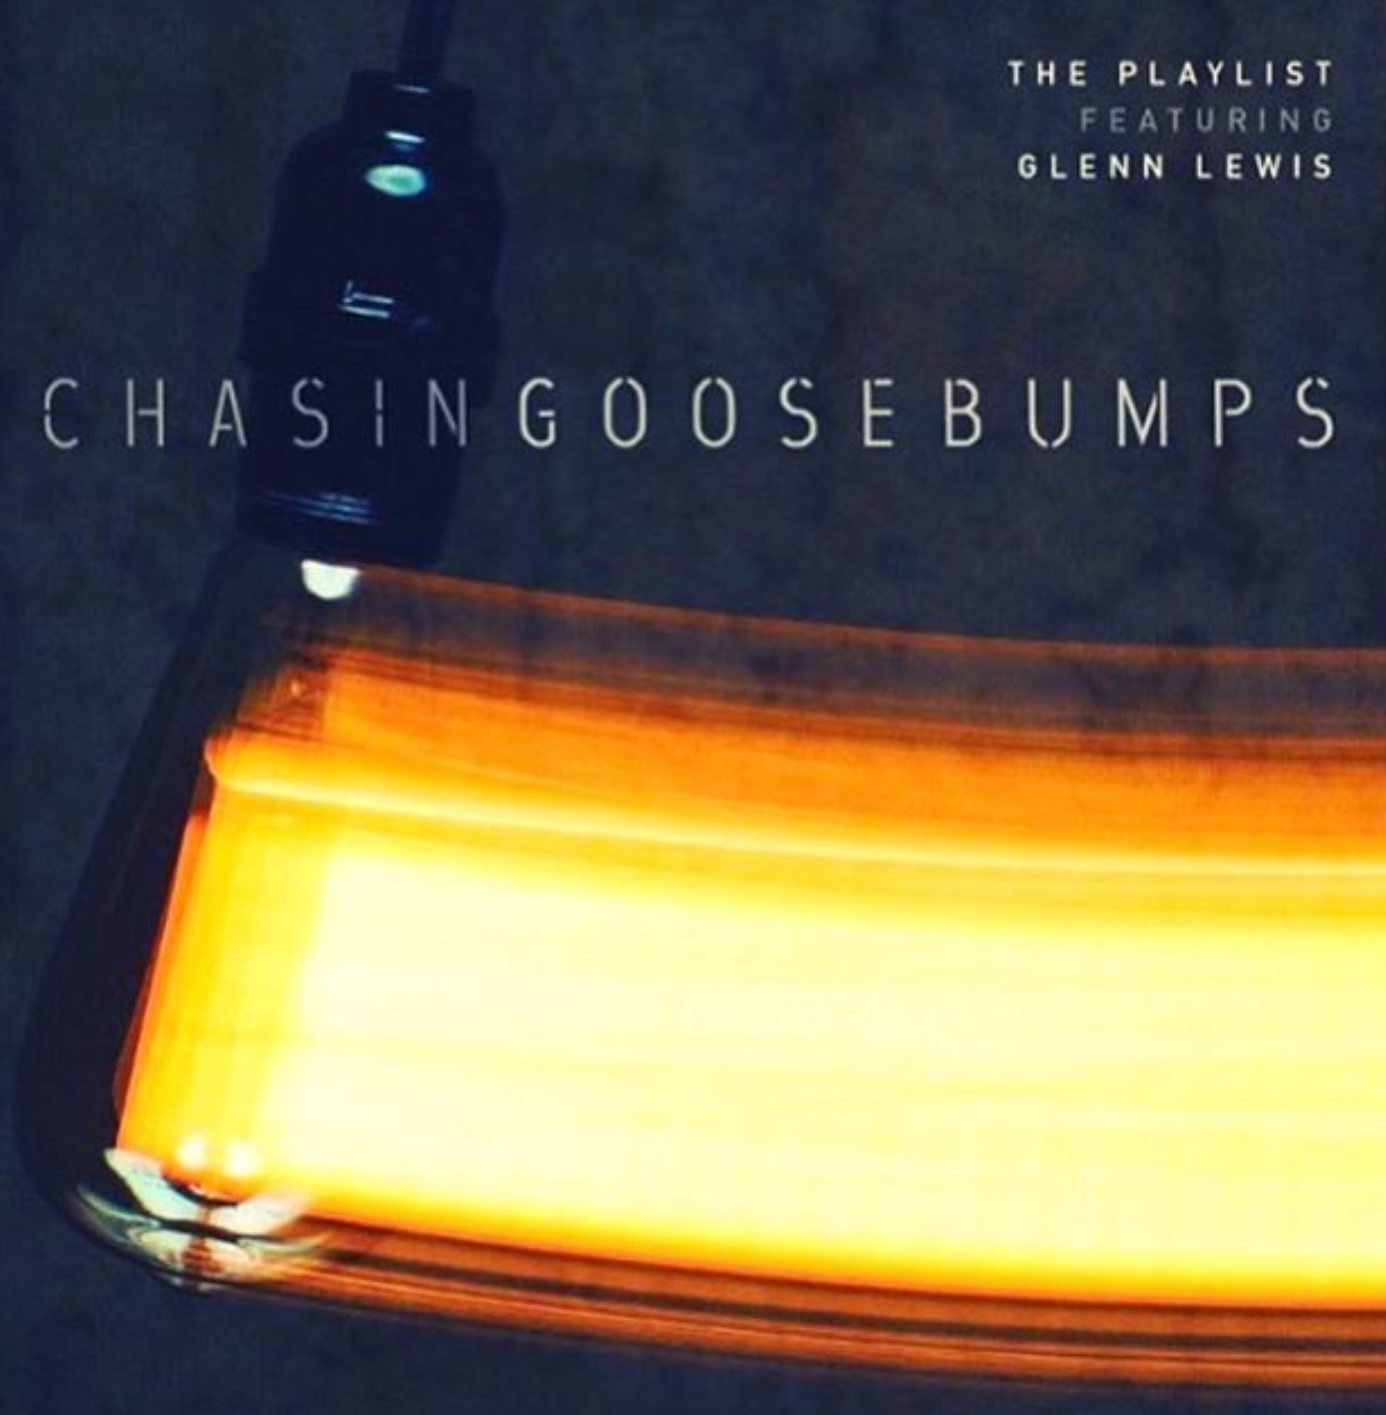 DJ Jazzy Jeff's The PlayList featuring Glenn Lewis "Chasing Goosebumps" Album is Out Now